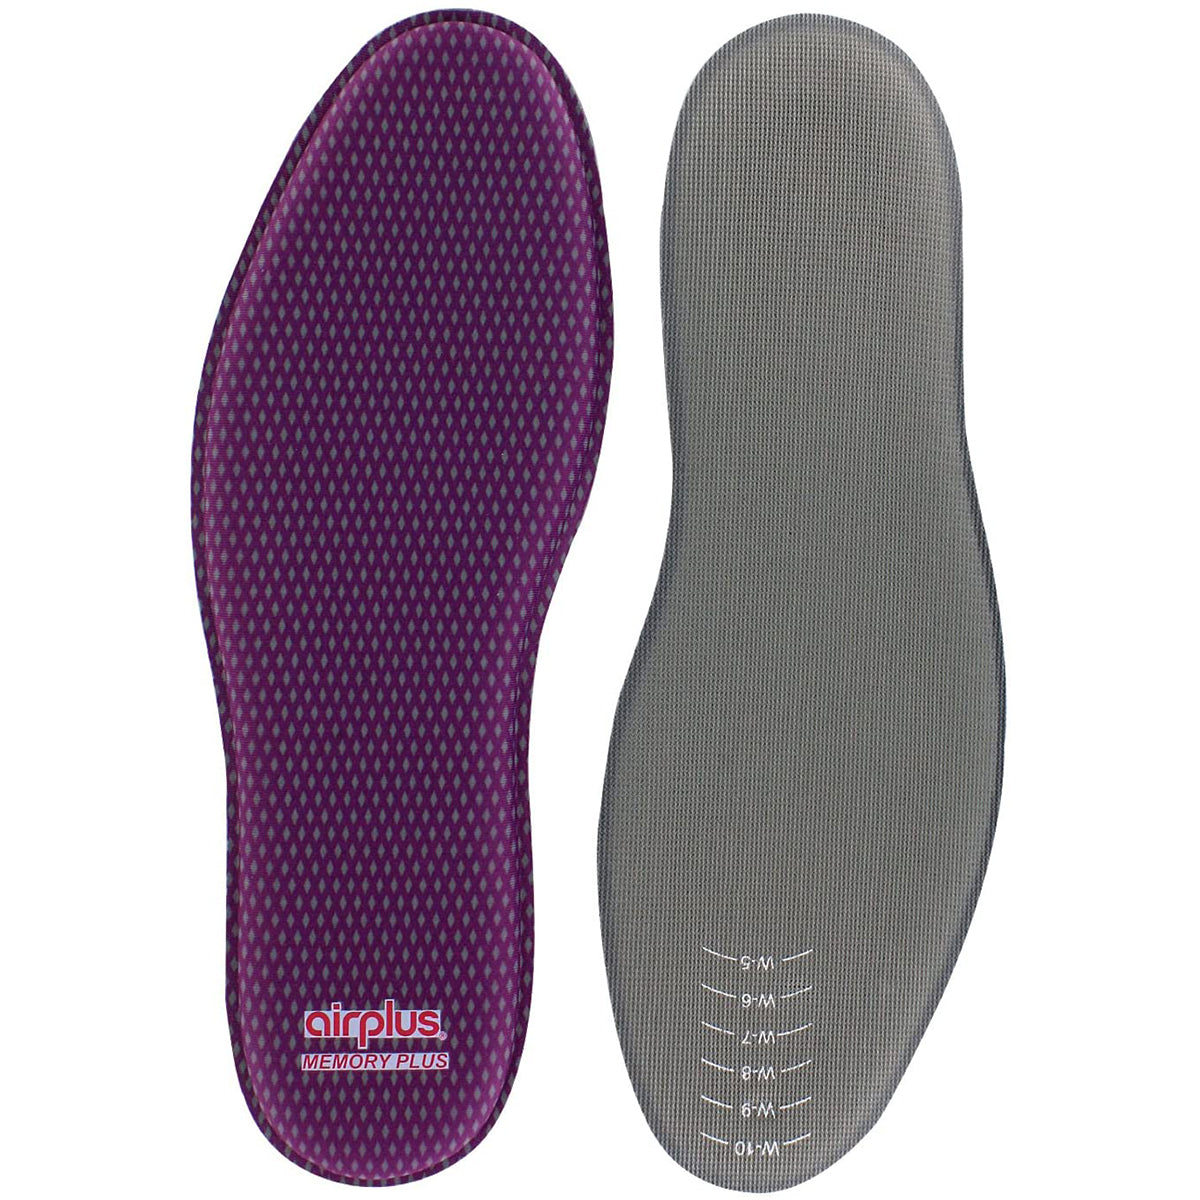 Airplus Women's Size 5-11 Memory Comfort Pressure Relief Shoe Insoles Airplus